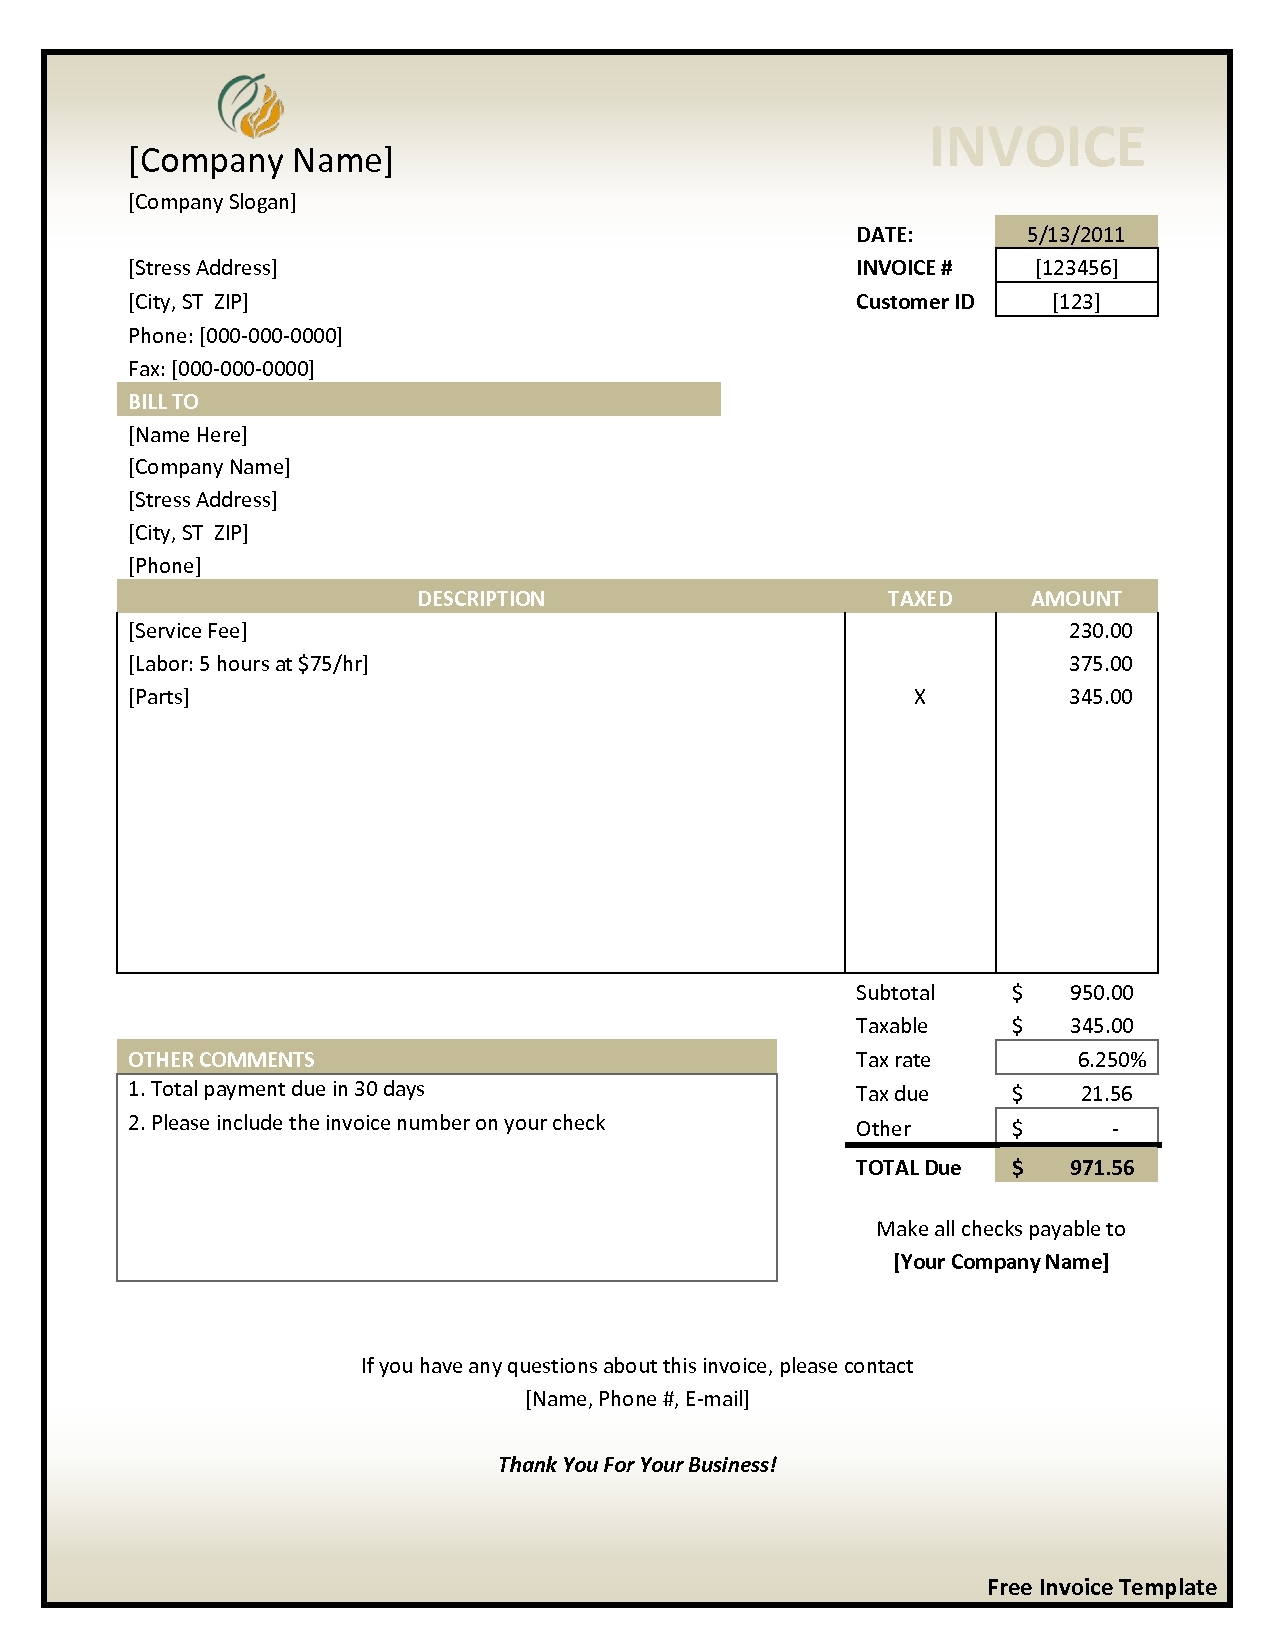 invoice download template download sample invoice invoice template free 2016 1275 X 1650